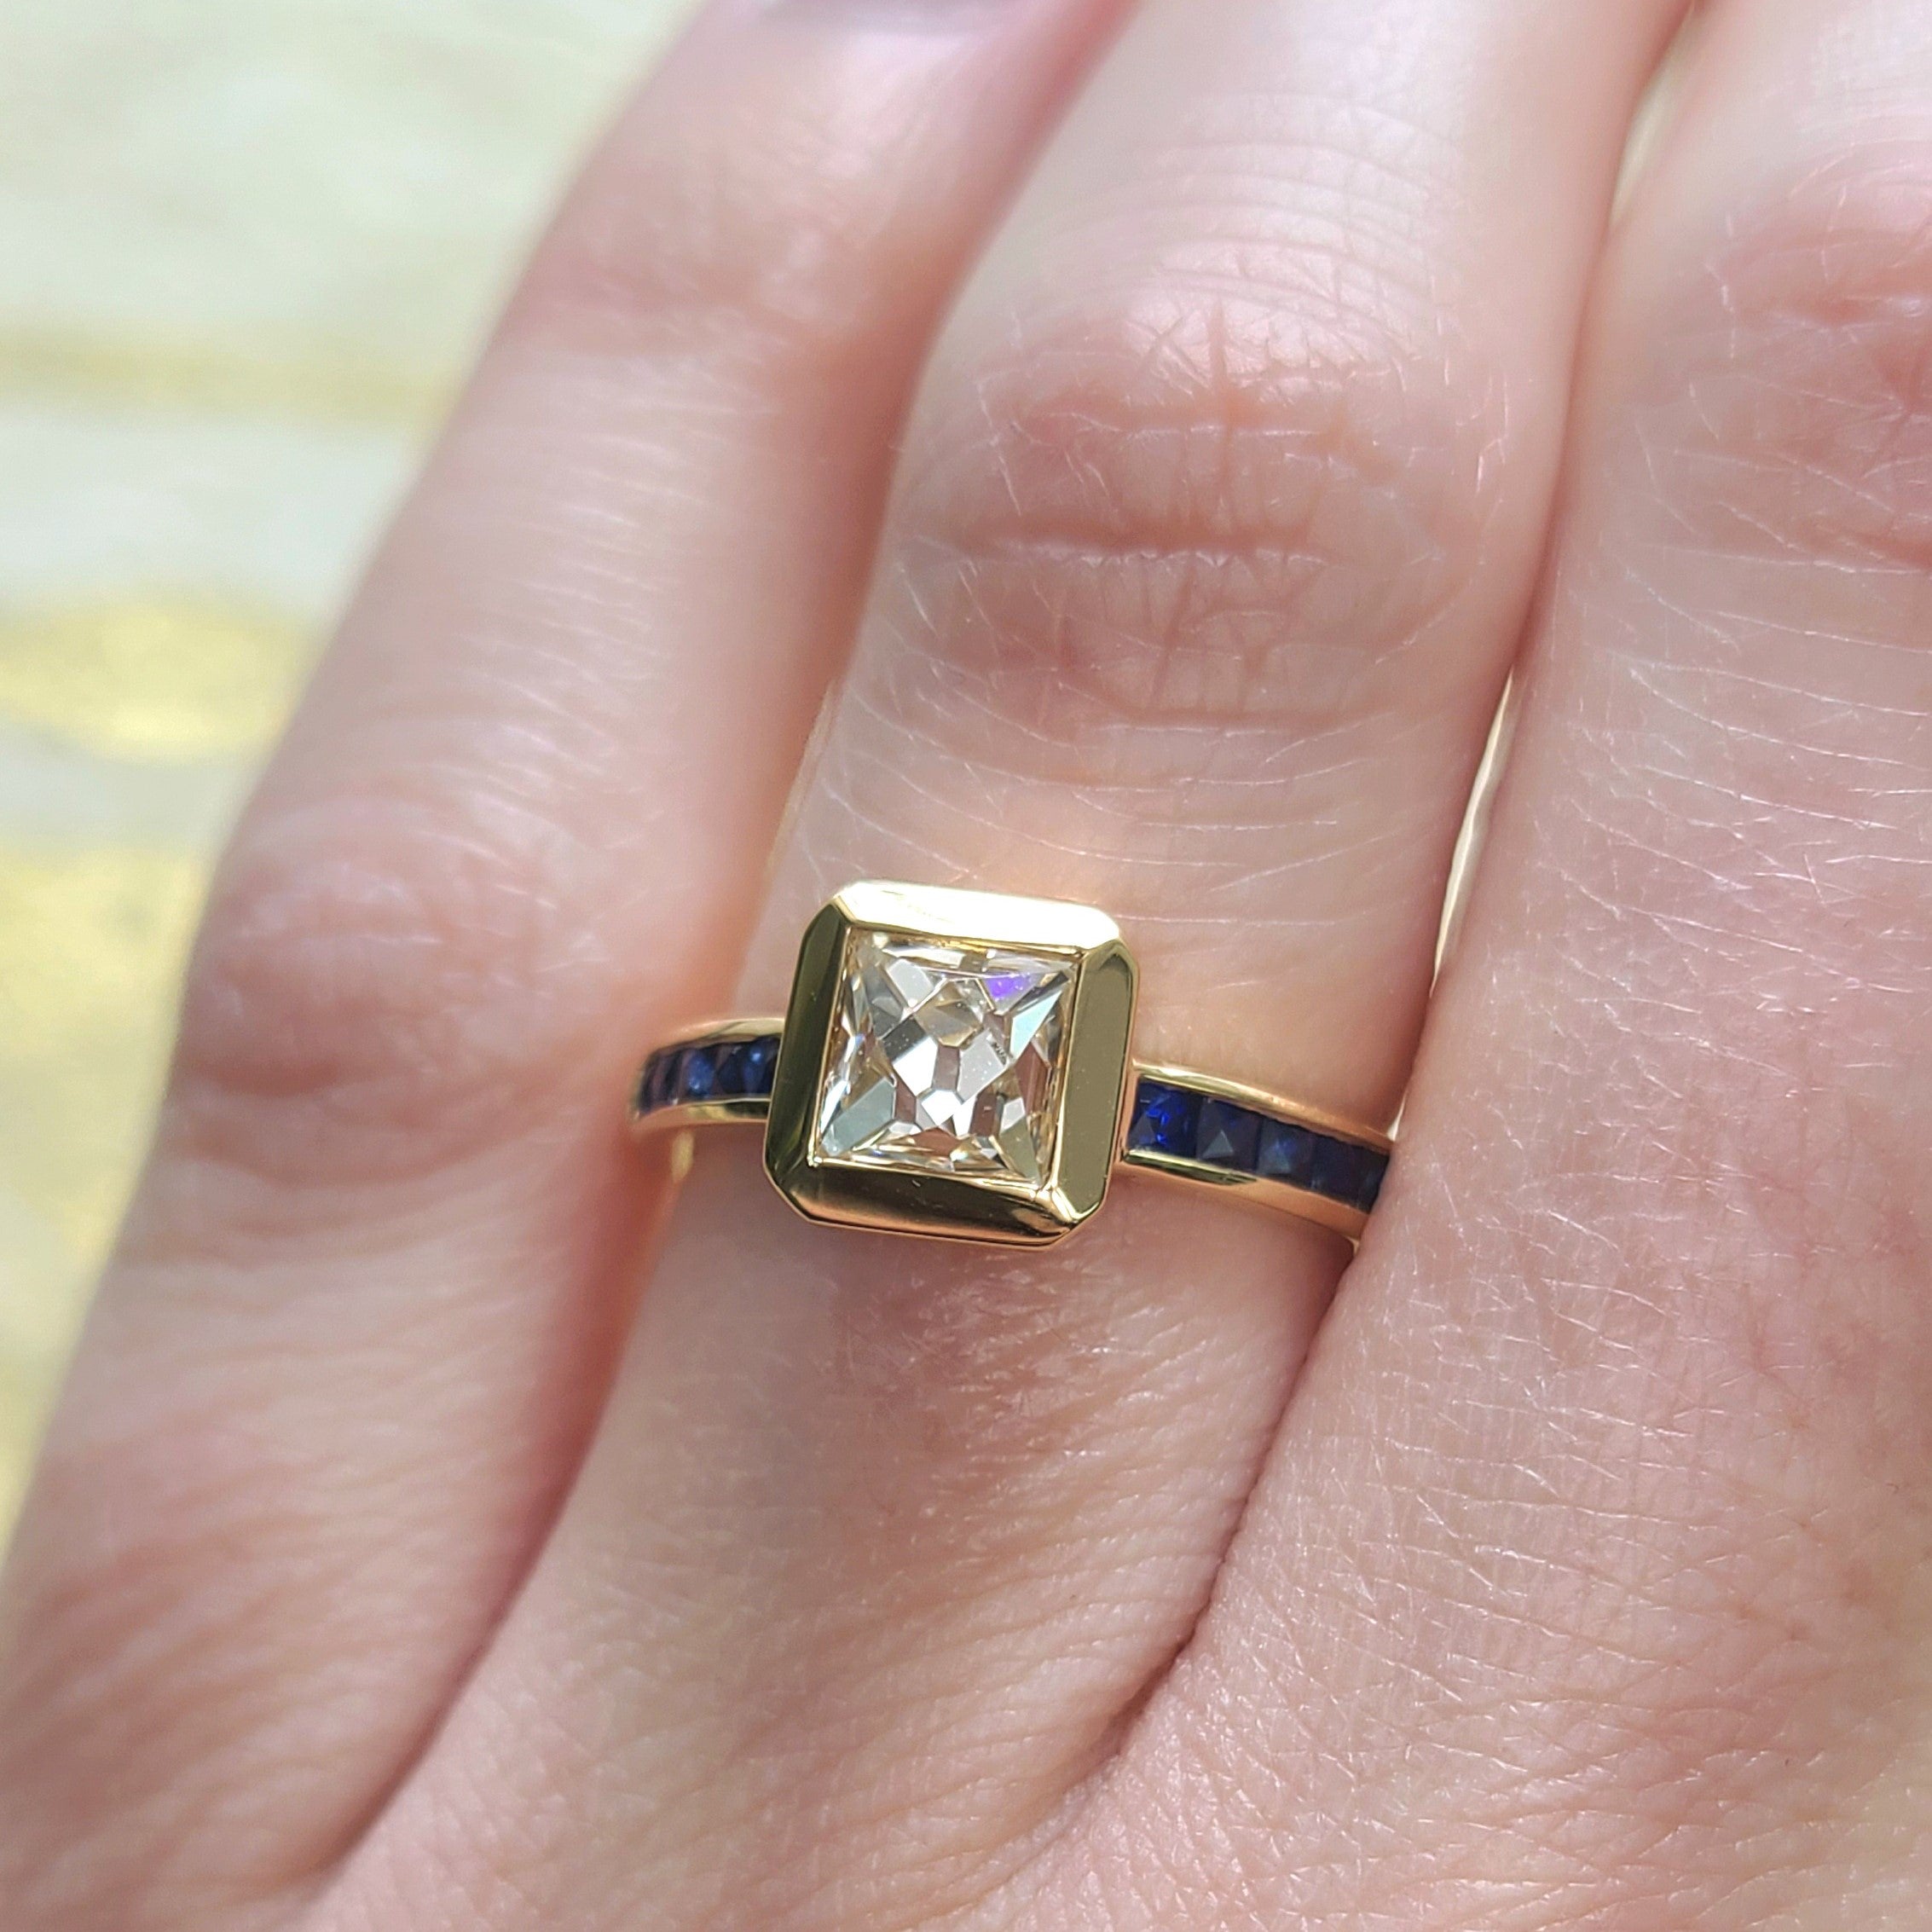 SINGLE STONE KARINA RING featuring 1.15ct K/VS1 GIA certified French cut diamond with 0.39ctw French cut blue sapphire accent stones bezel set in a handcrafted 18K yellow gold mounting.